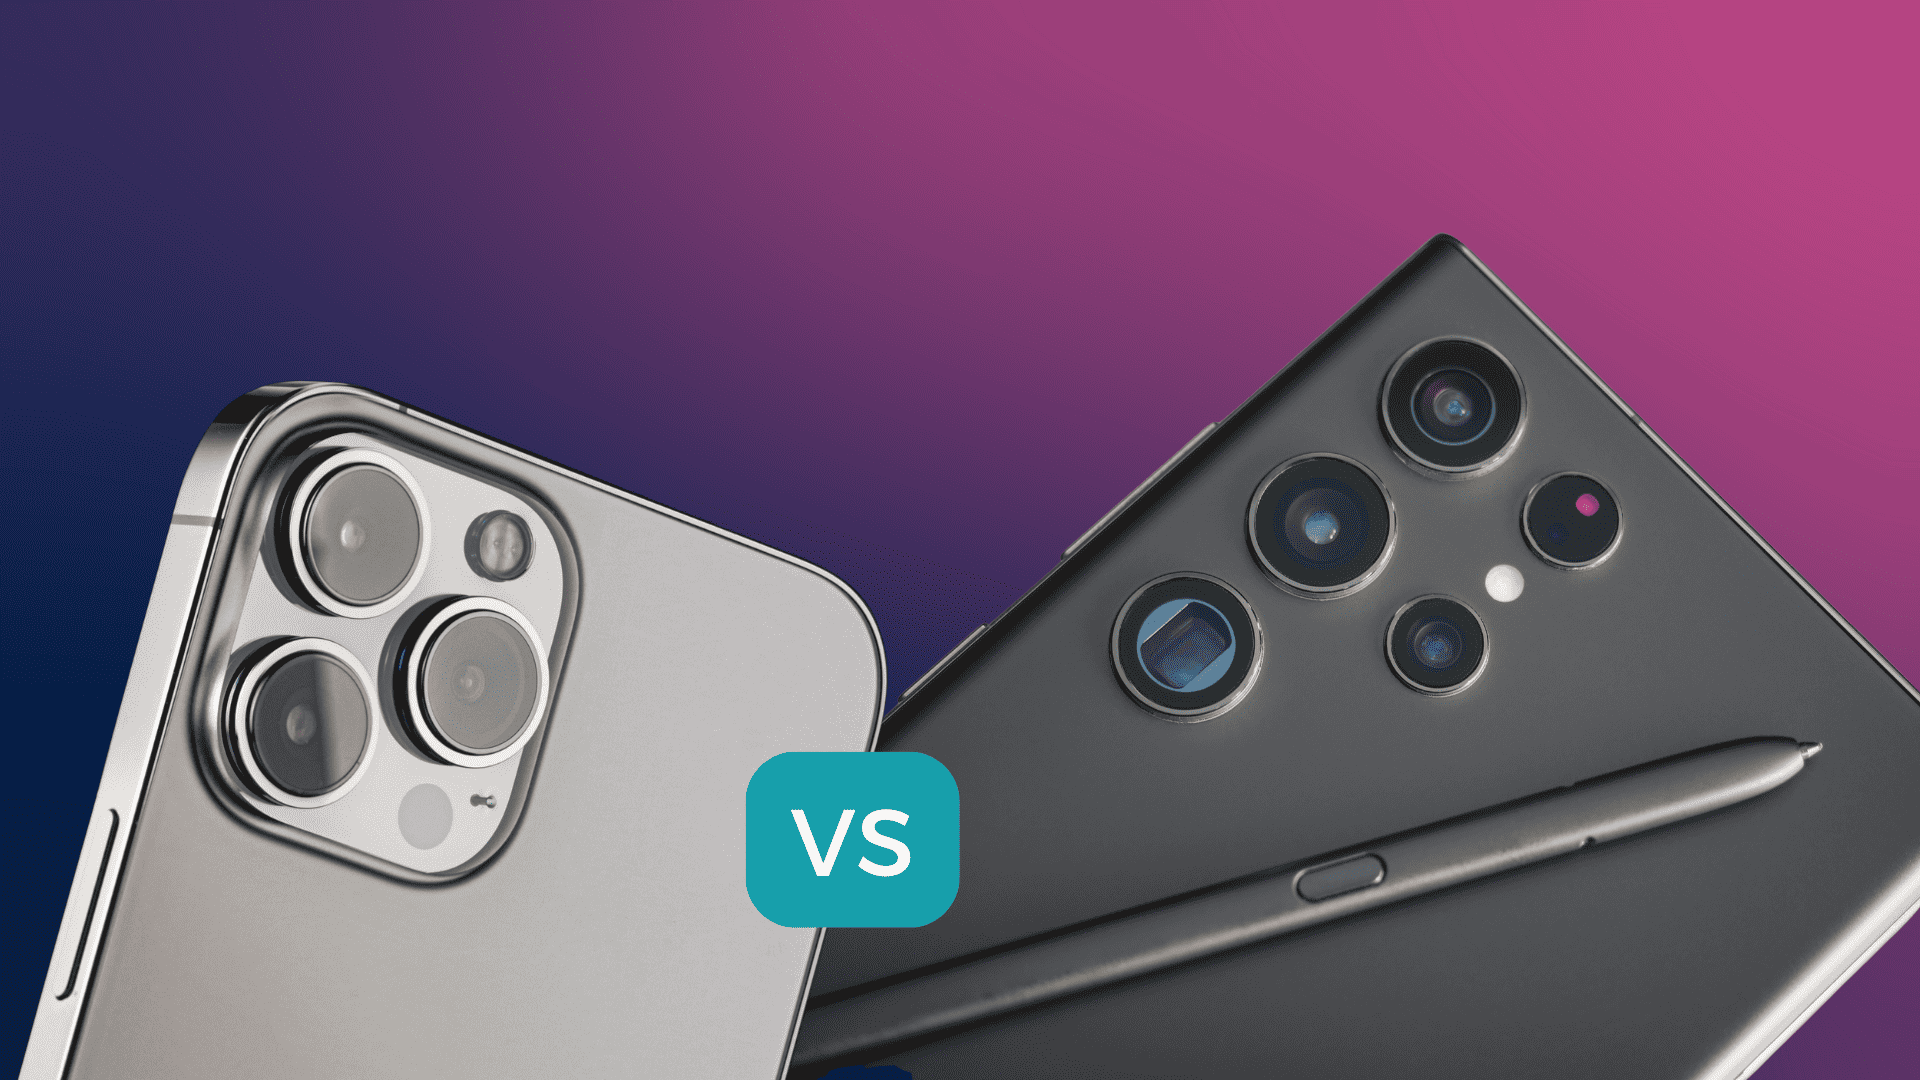 The battle of apple vs android has heated up